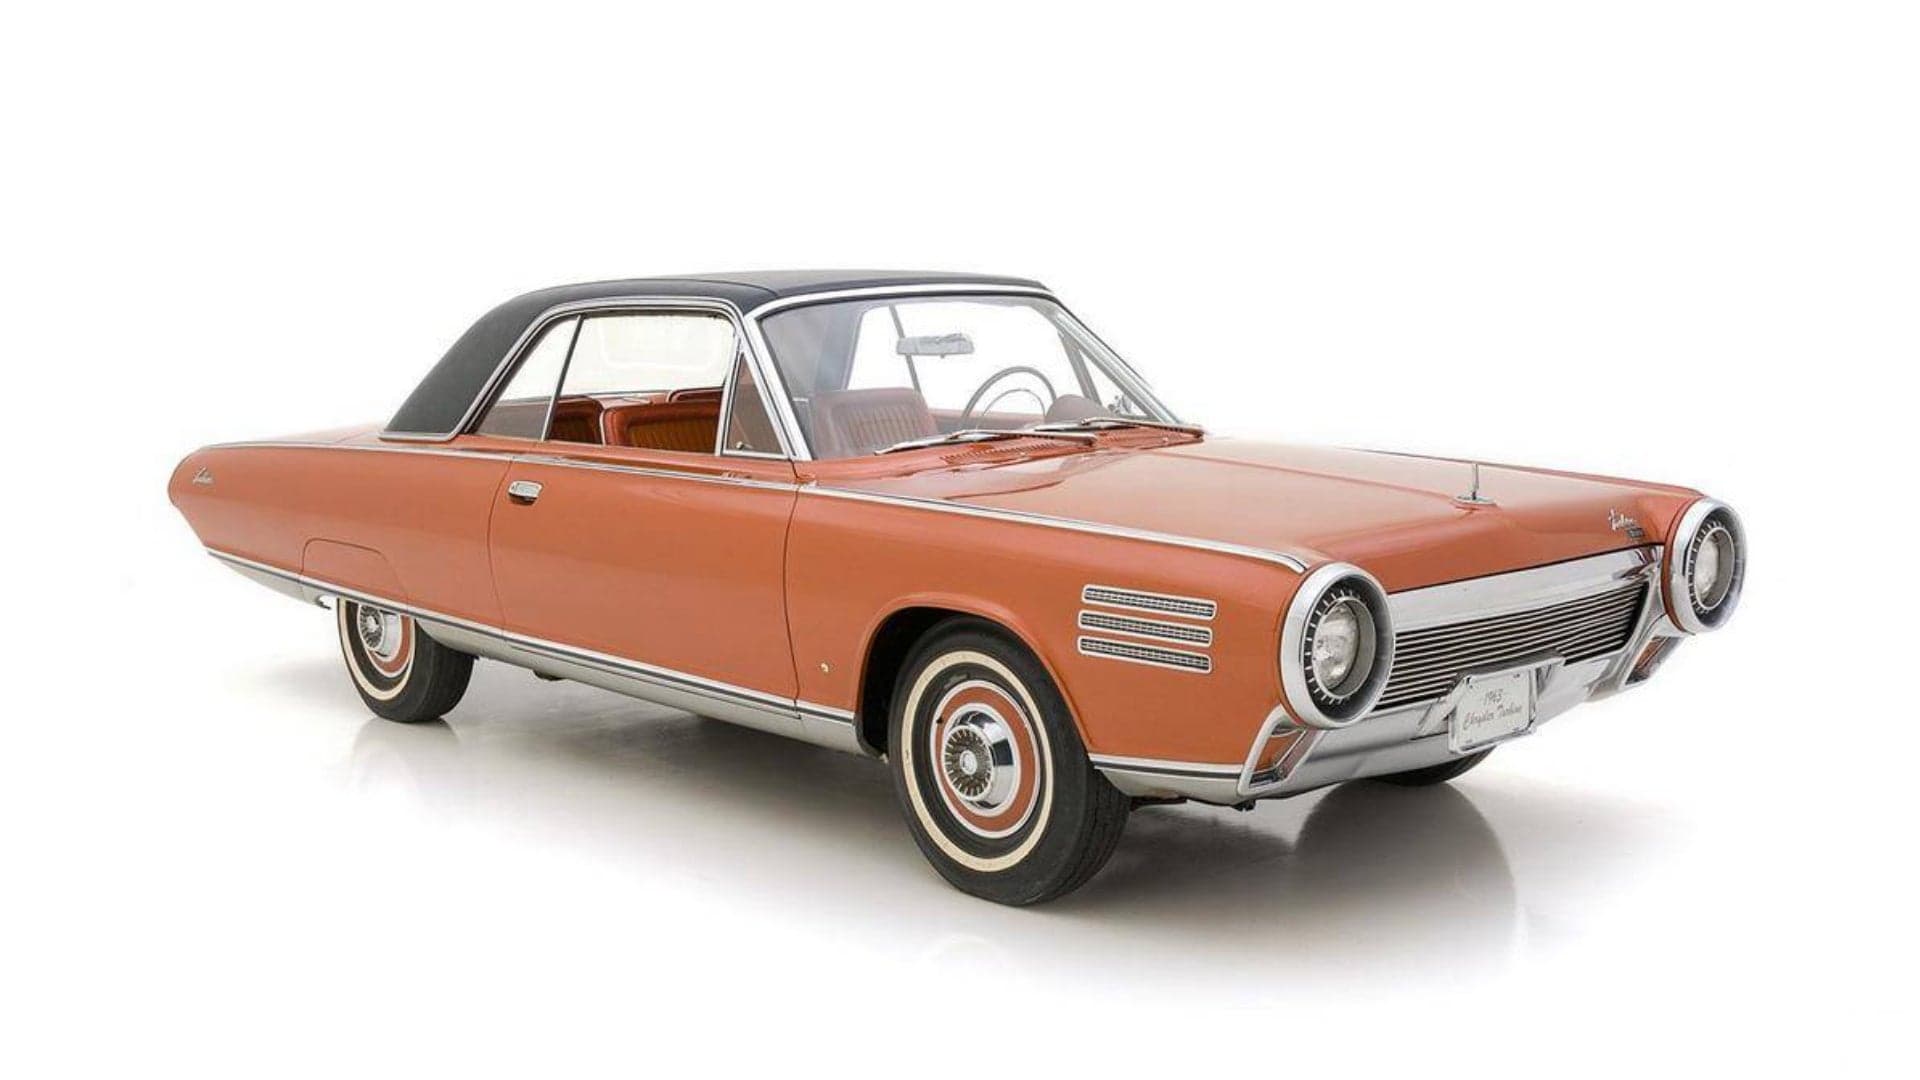 New Owner of Chrysler Turbine Car Promises to Actually Drive It